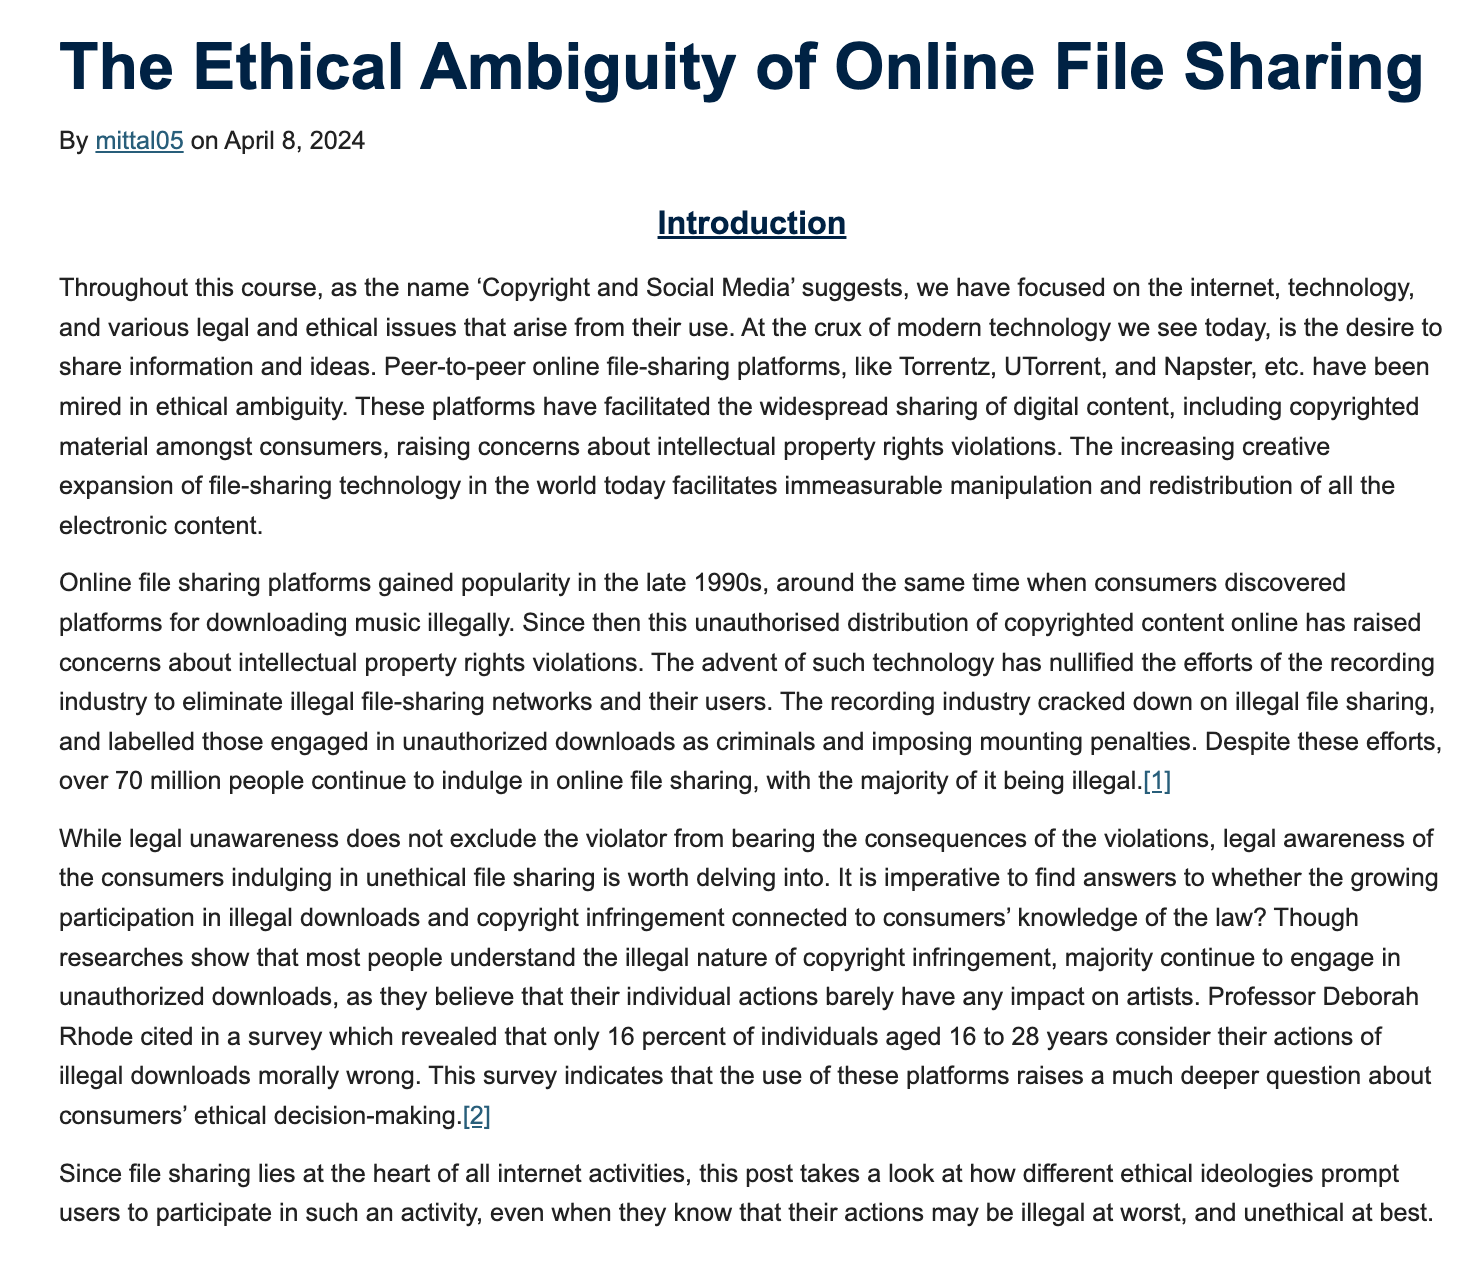 The Ethical Ambiguity of Online File Sharing